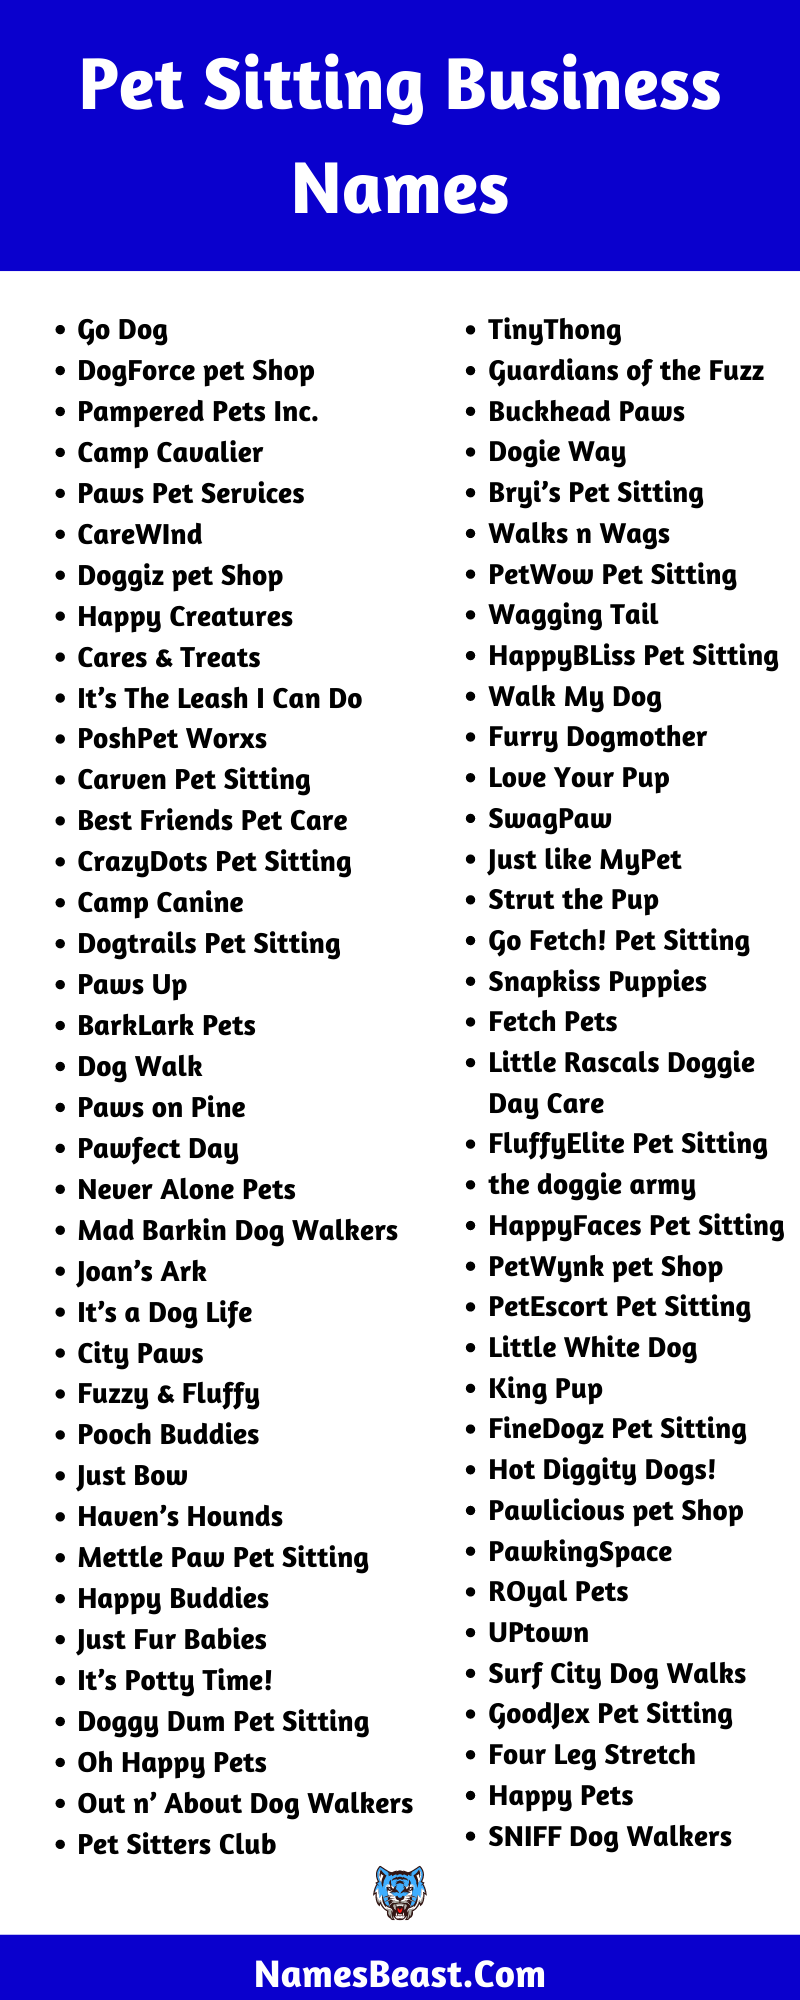 Pet Sitting Business Name Ideas